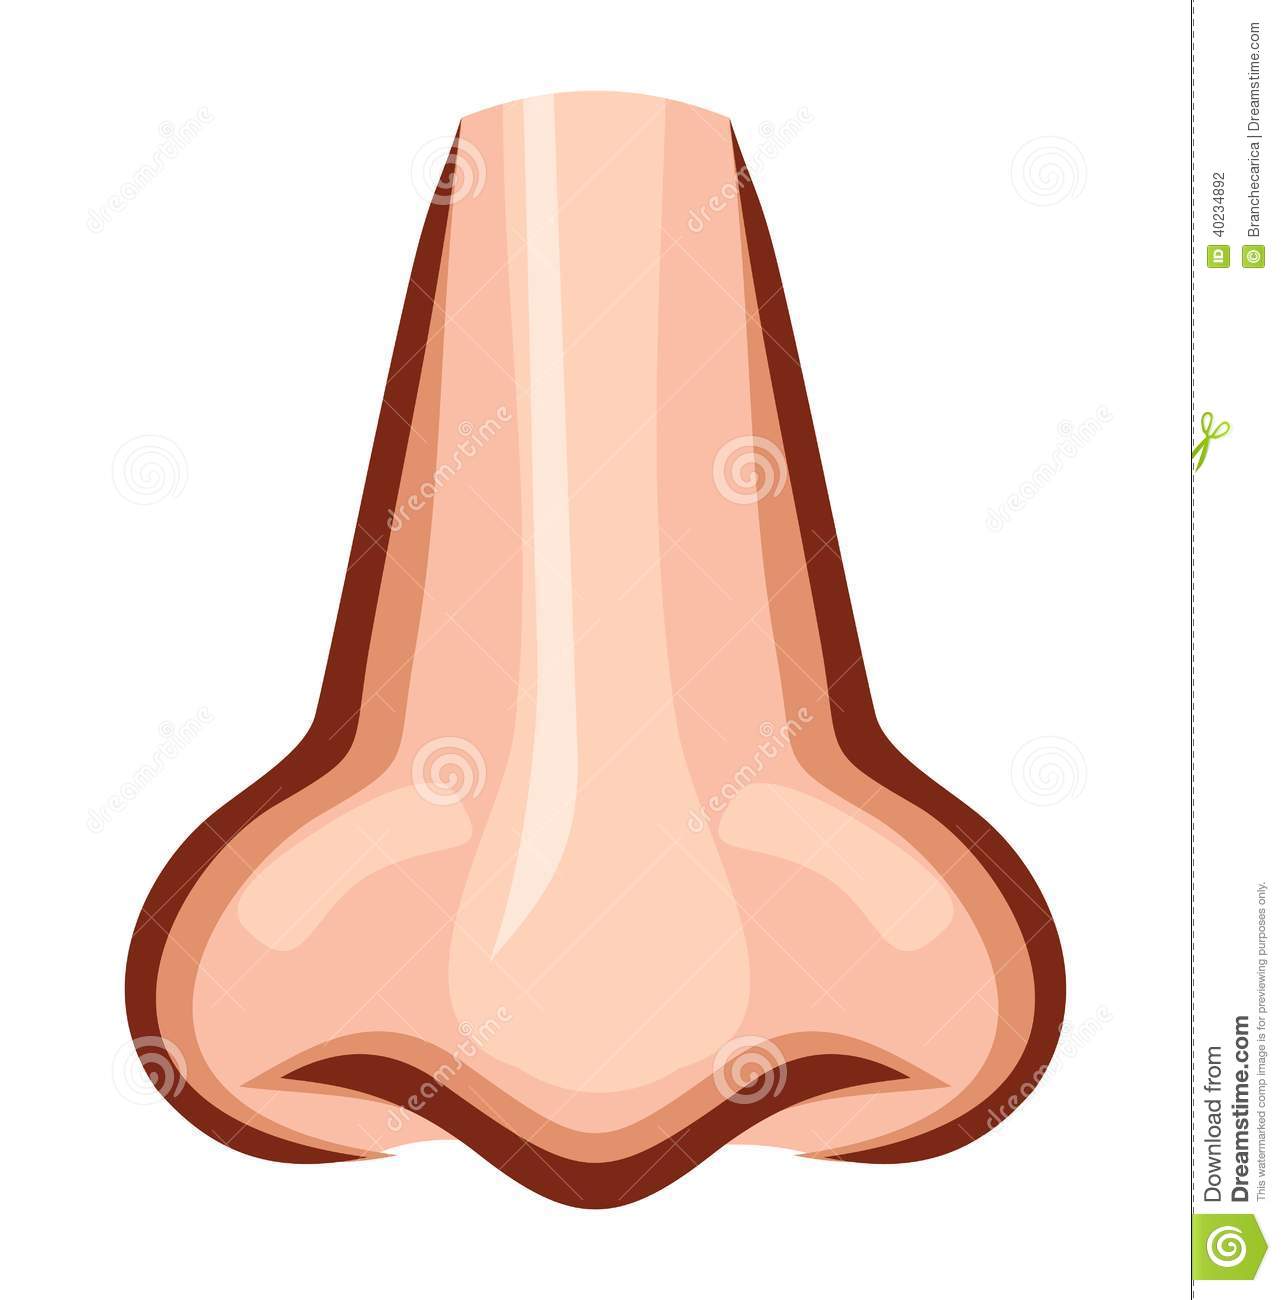 Human nose clipart for kids 3 » Clipart Station.